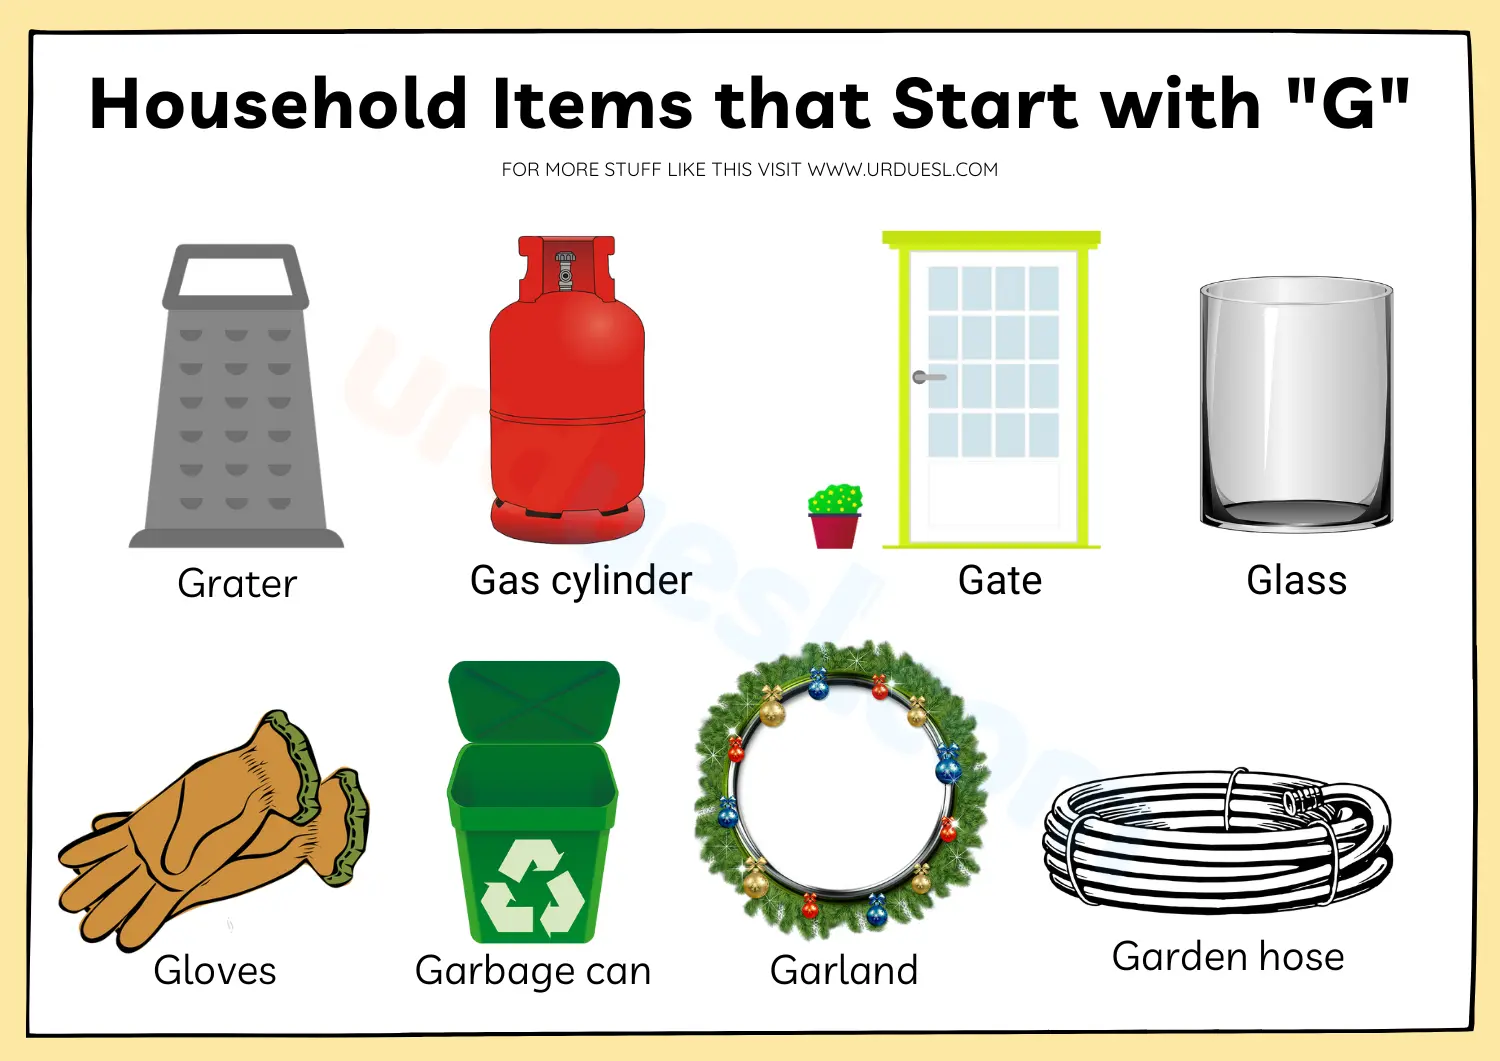 An image showing various household items that start with the letter 'G.' These items include a garbage can, glassware, garden hose, and more.